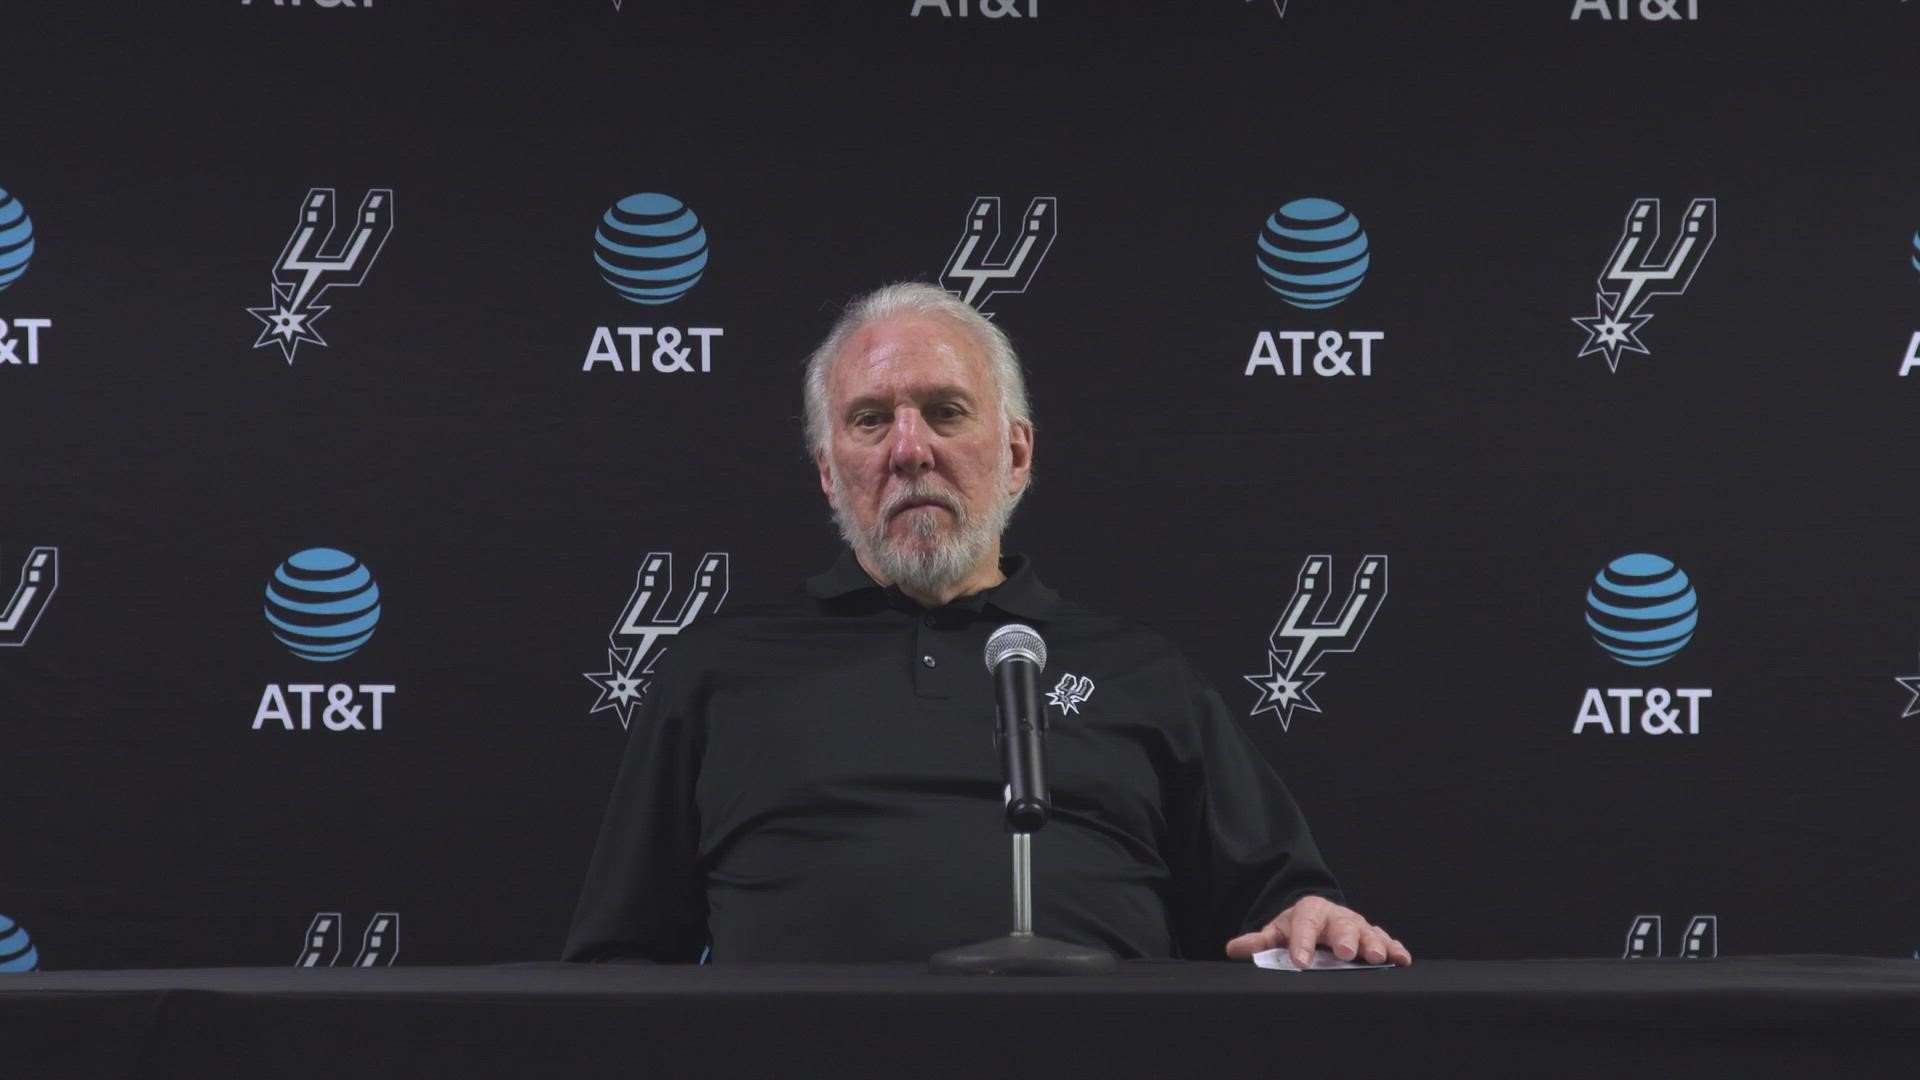 The Spurs’ head coach acknowledged patience is needed with the young team after they lost to visiting Dallas, 109-108.